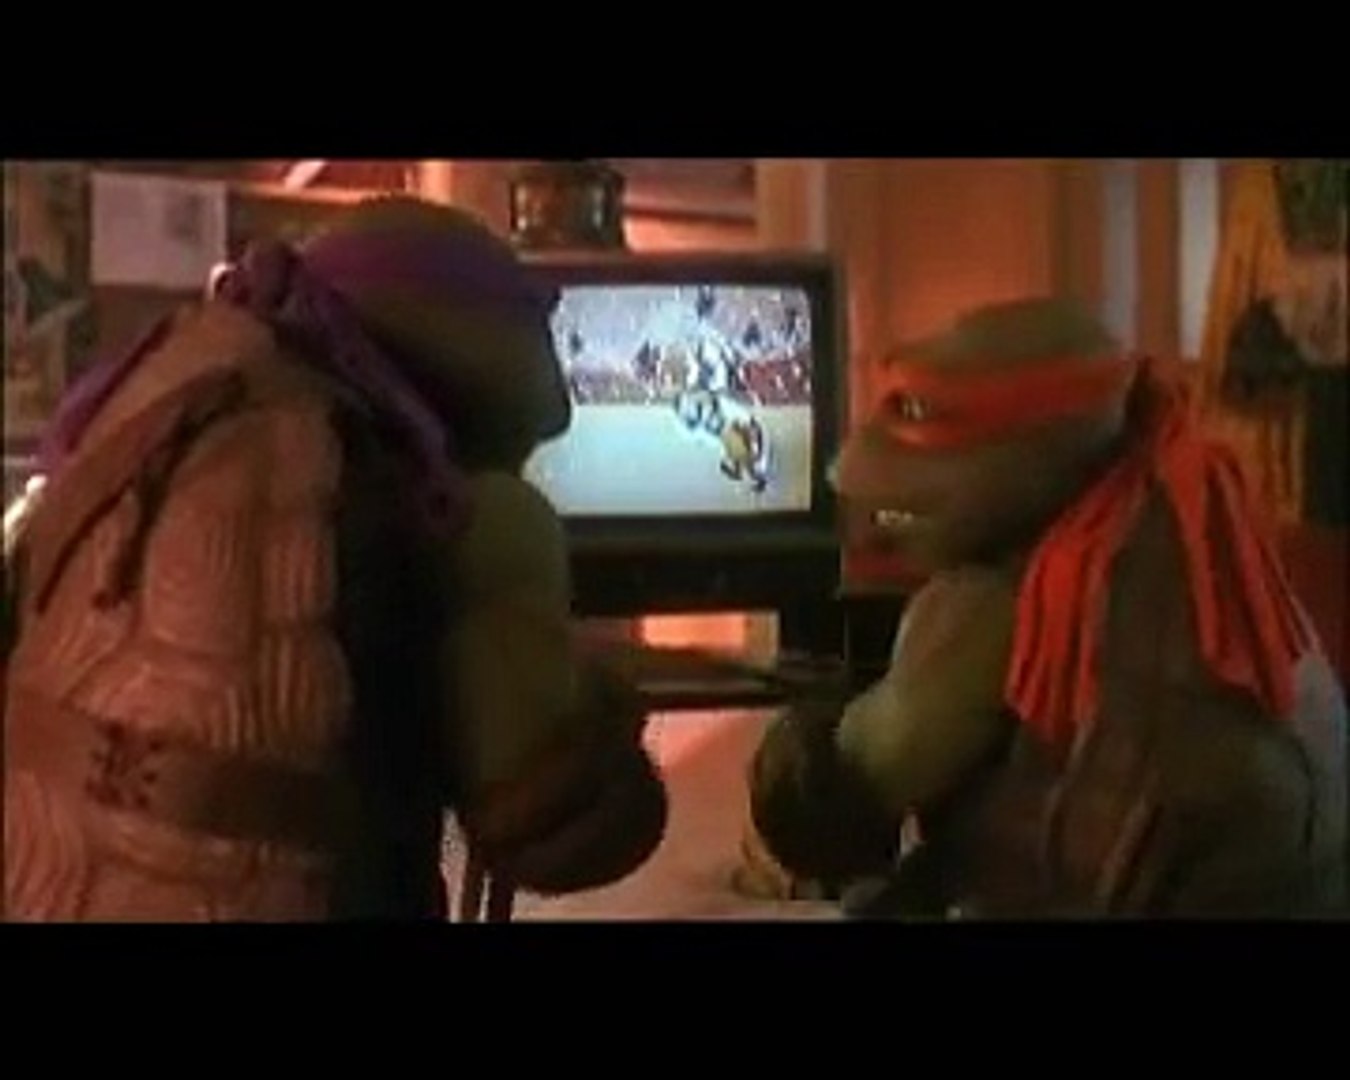 90 MINUTES of TMNT's Best Moments Ever! 🐢